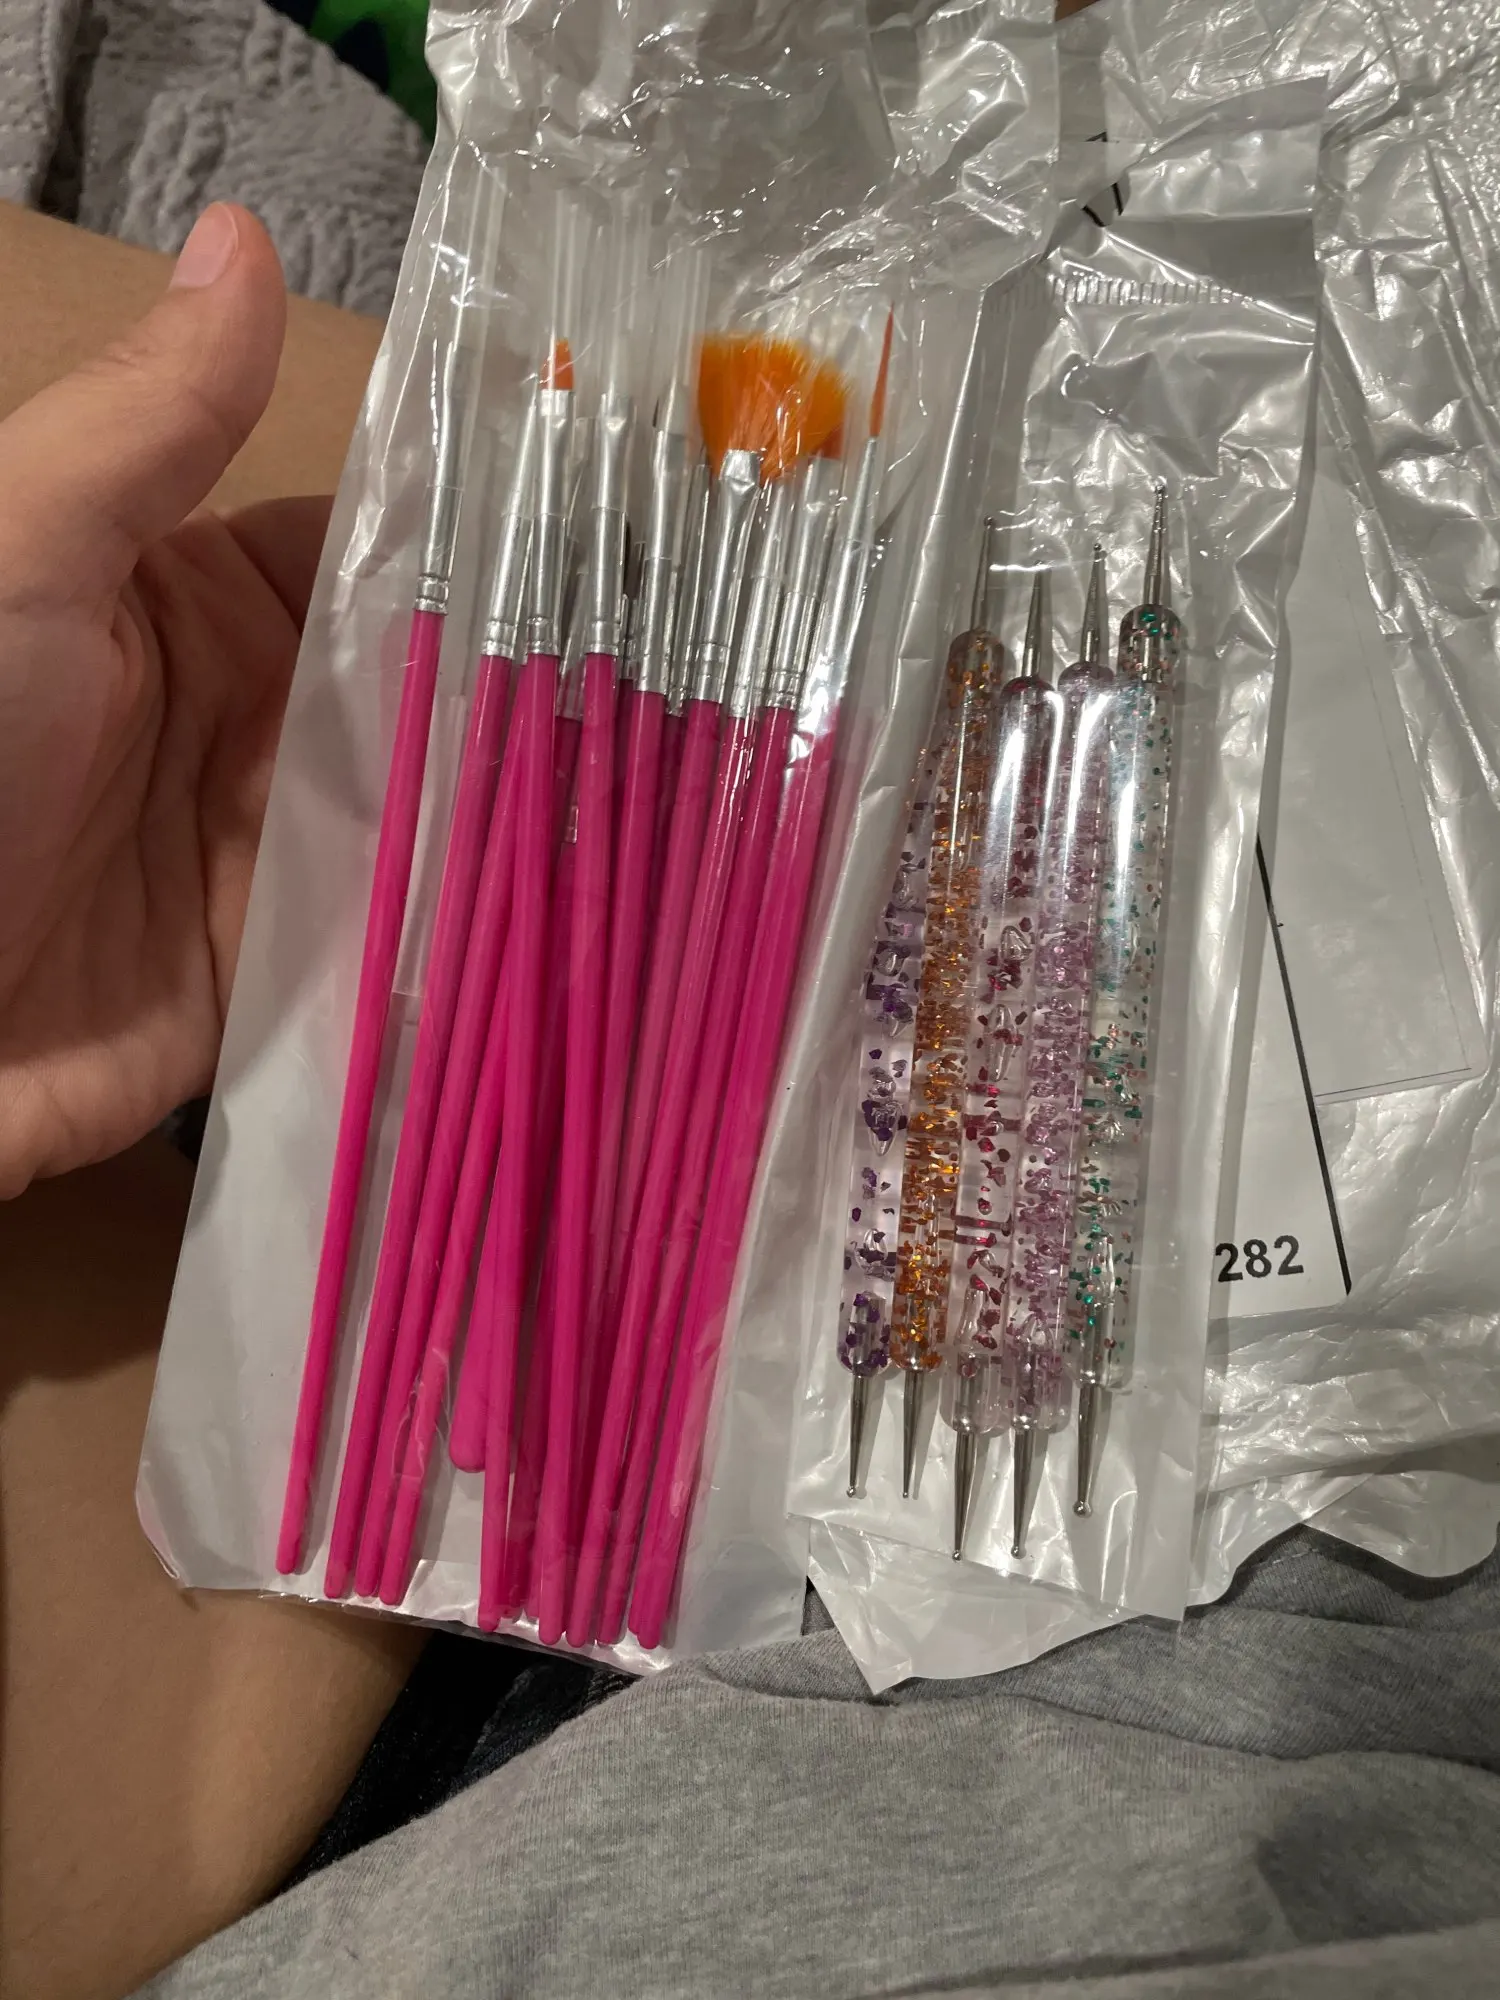 Get Creative Nails with 5/20Pcs Nail Art Brush Set – Perfect for Stunning Manicures photo review